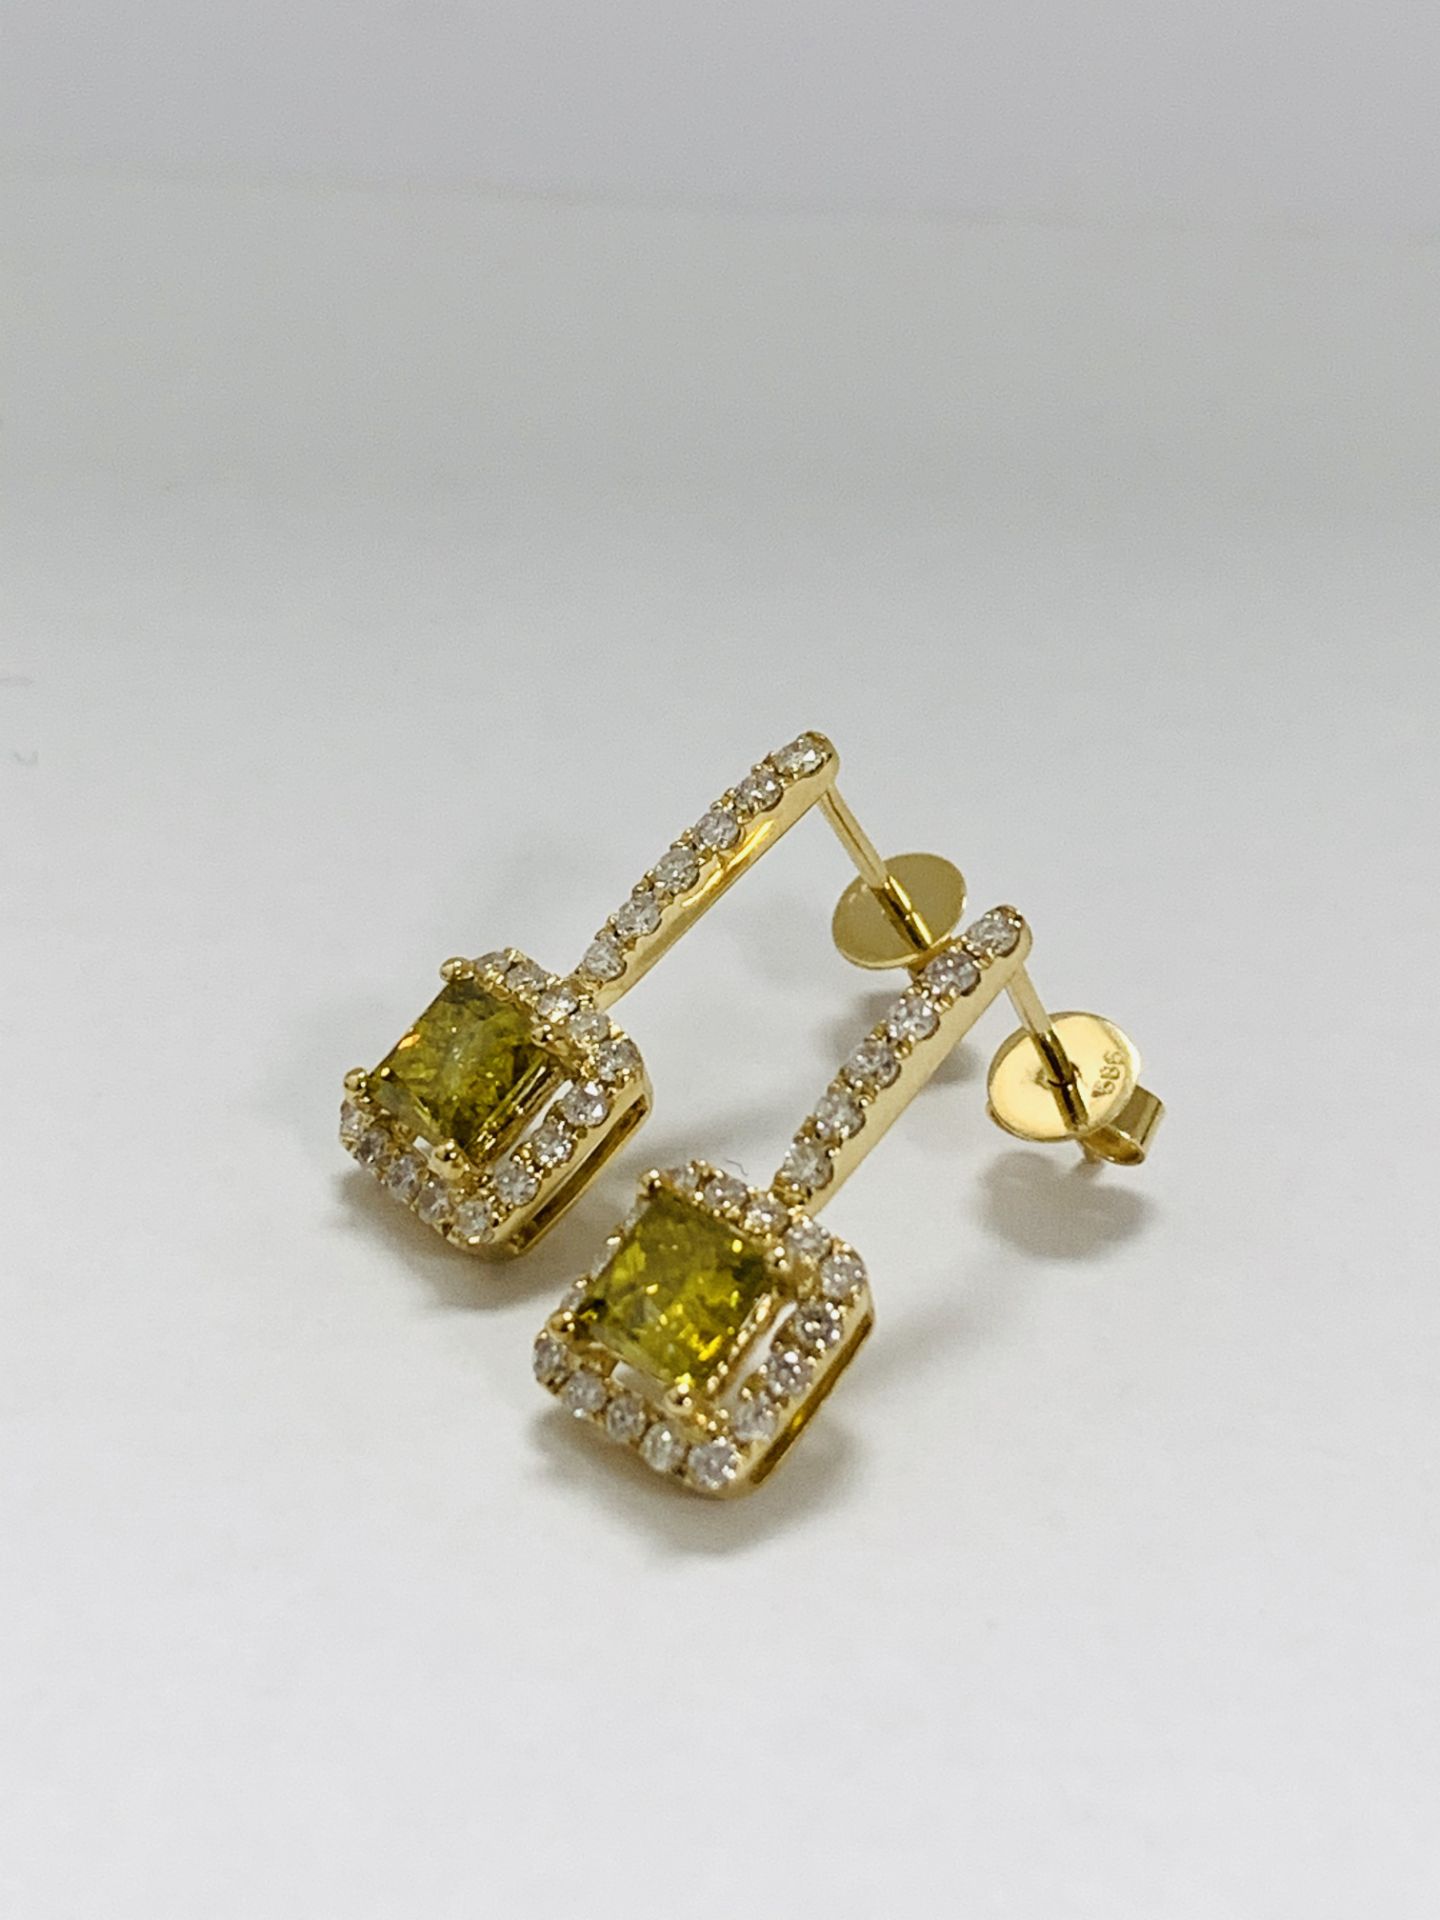 14K Yellow Gold Pair Of Earrings - Image 2 of 9